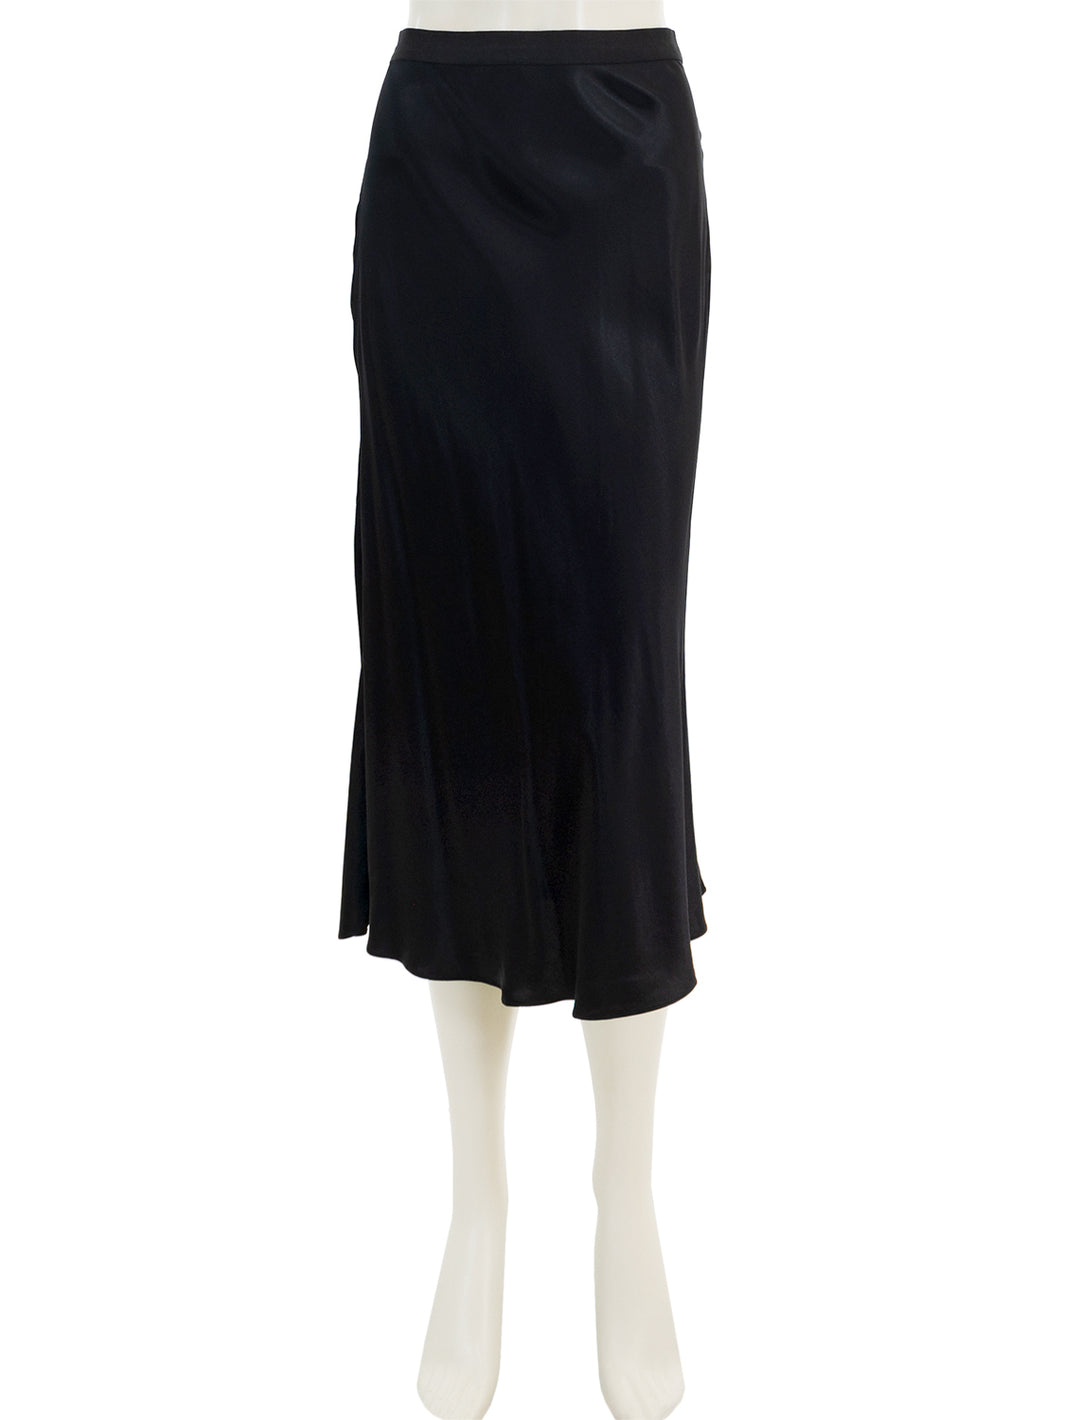 Front view of Rails' berlin skirt in black.